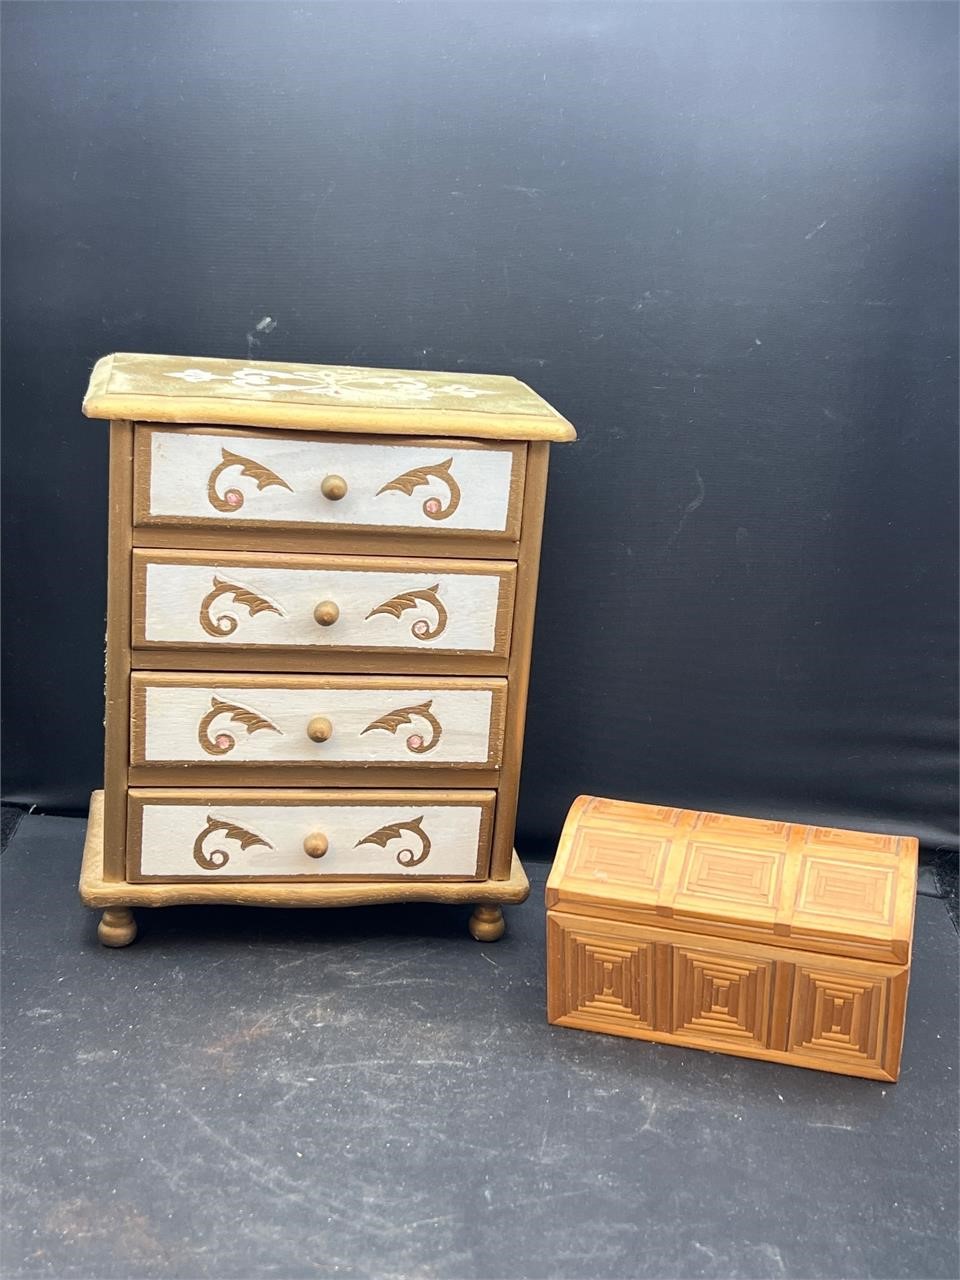 Wooden jewelry boxes vintage